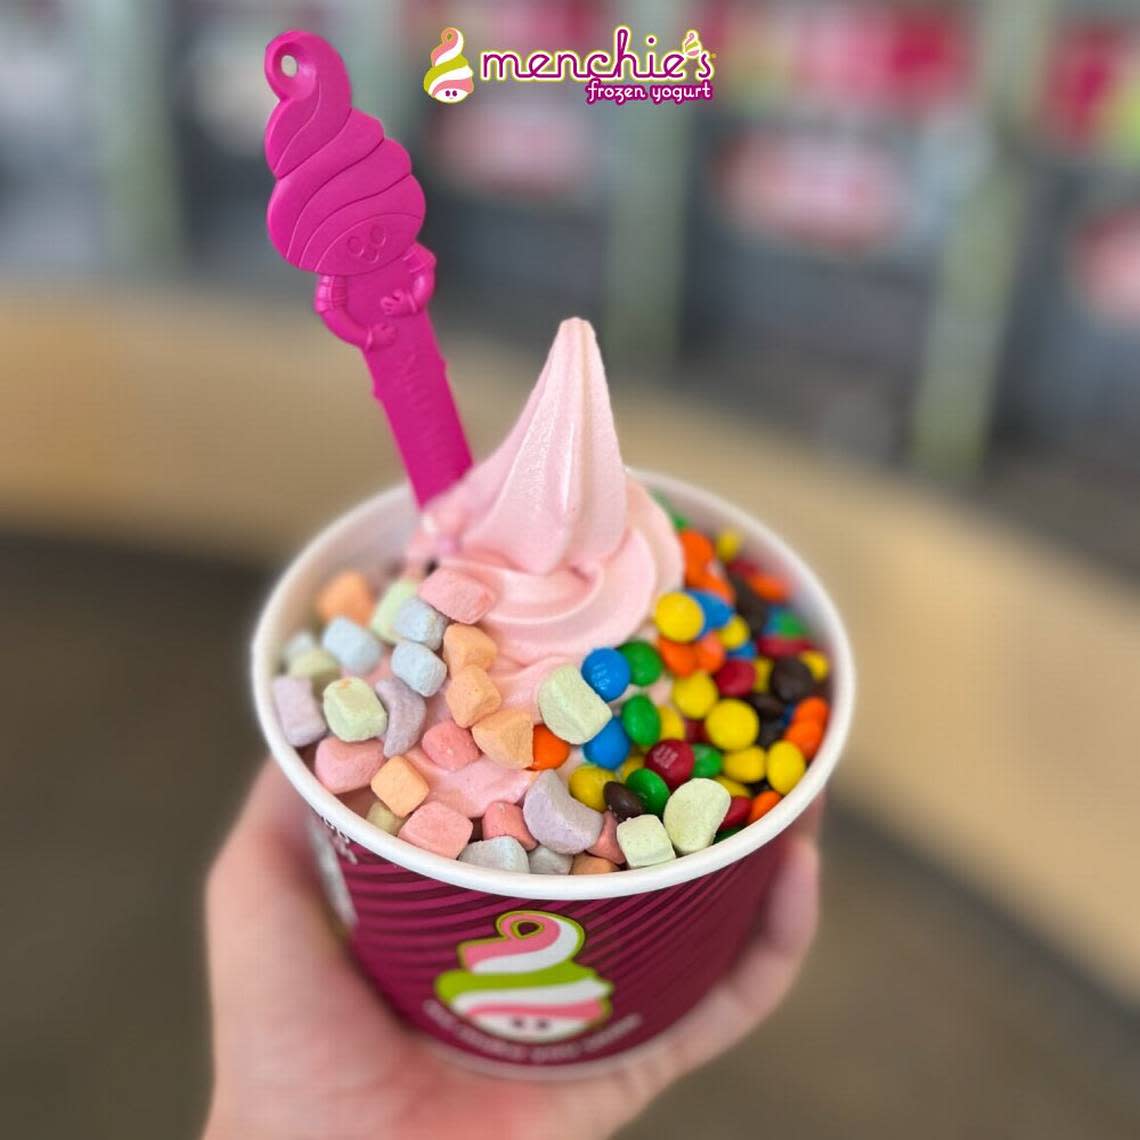 Menchie’s Frozen Yogurt offers customers a variety of toppings.